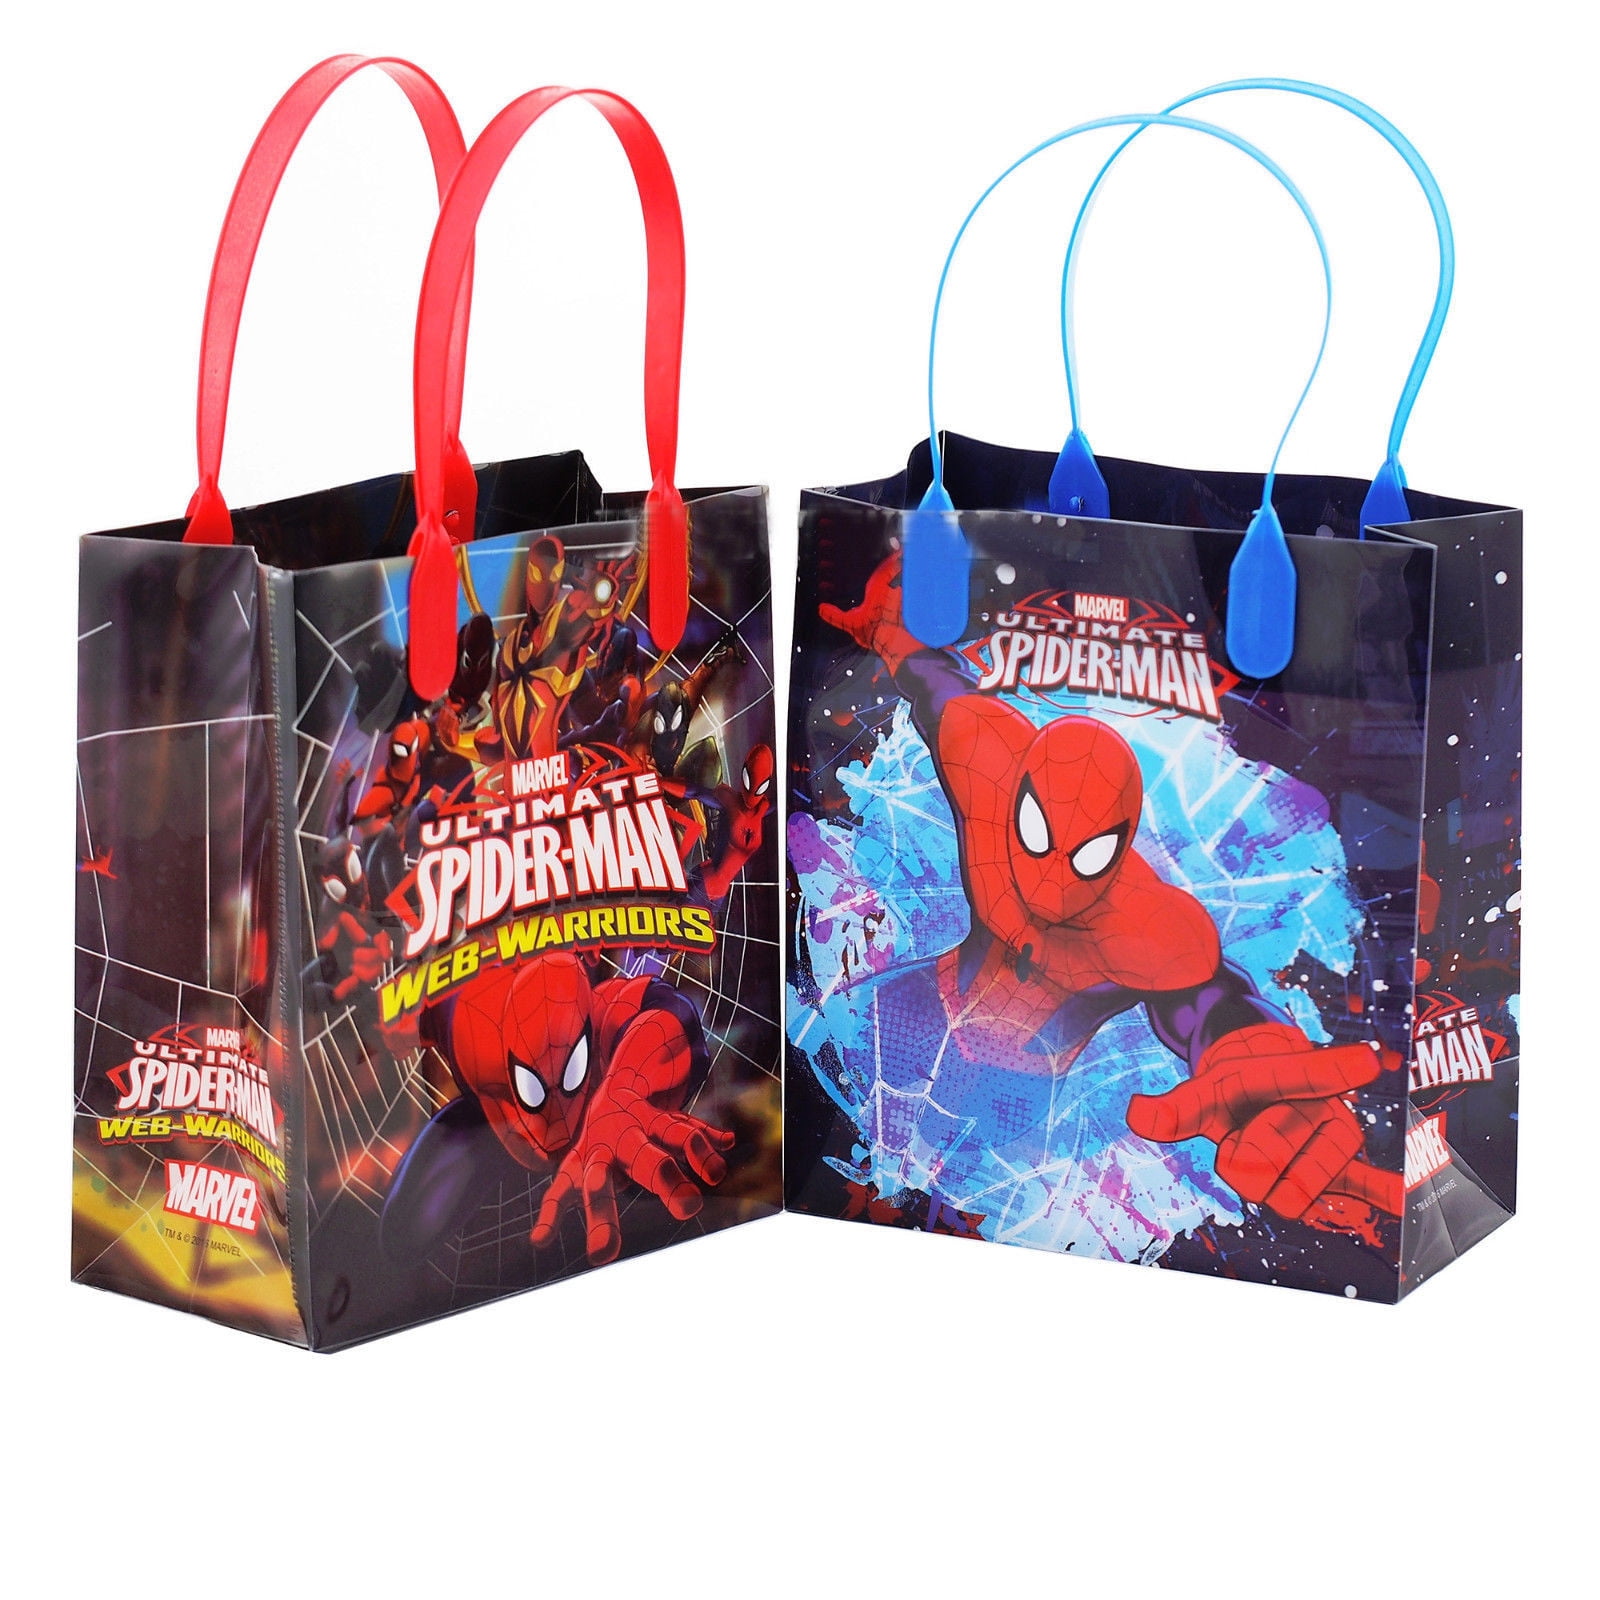 Constitute Characteristic Digital 12pcs Marvel Spiderman Goodie bags Party Favor Goody Bags Spider-Man Gift  Bags - Walmart.com